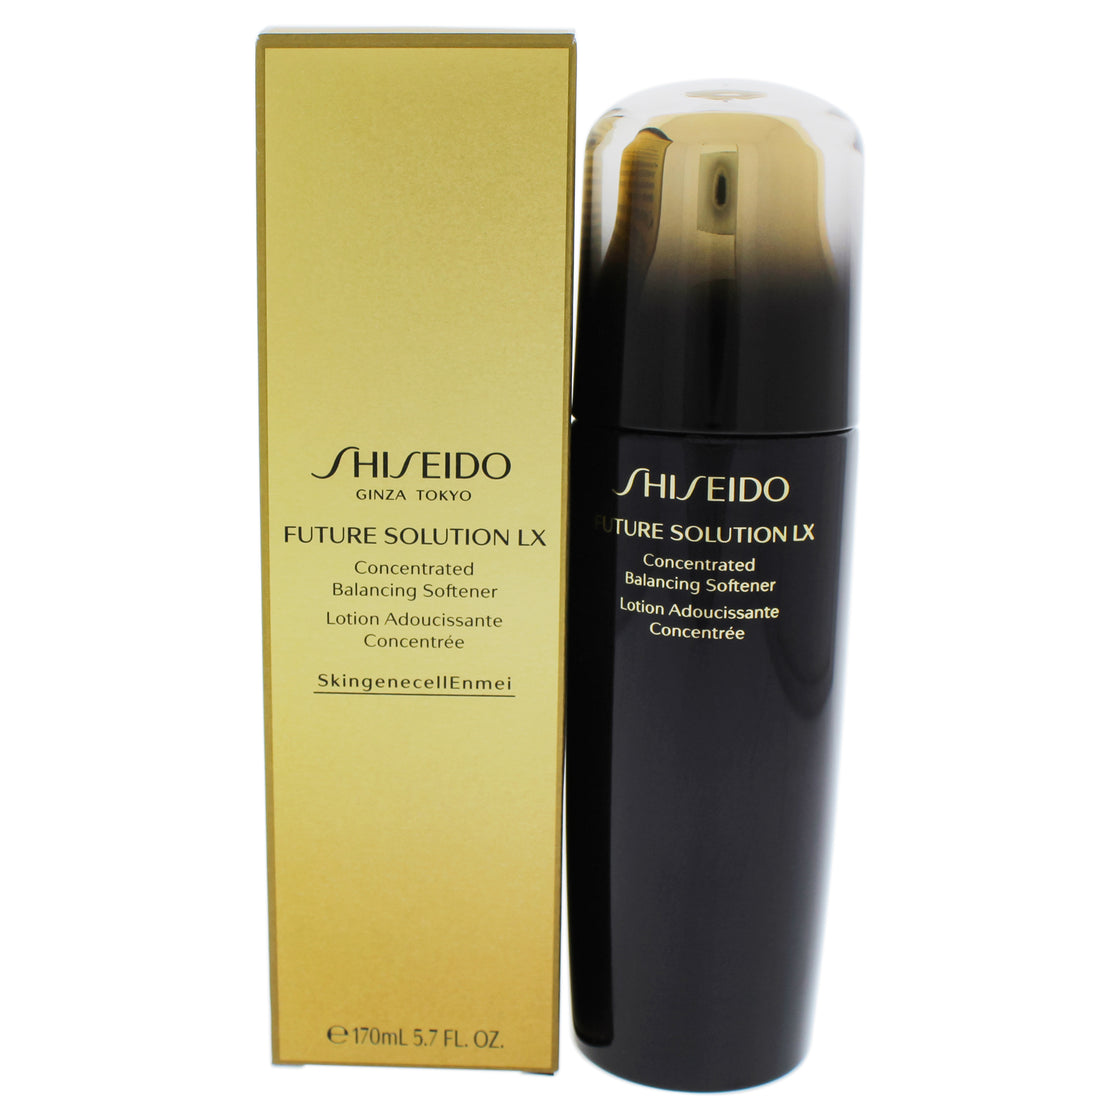 Future Solution LX Concentrated Balancing Softener by Shiseido for Women - 5.7 oz Lotion